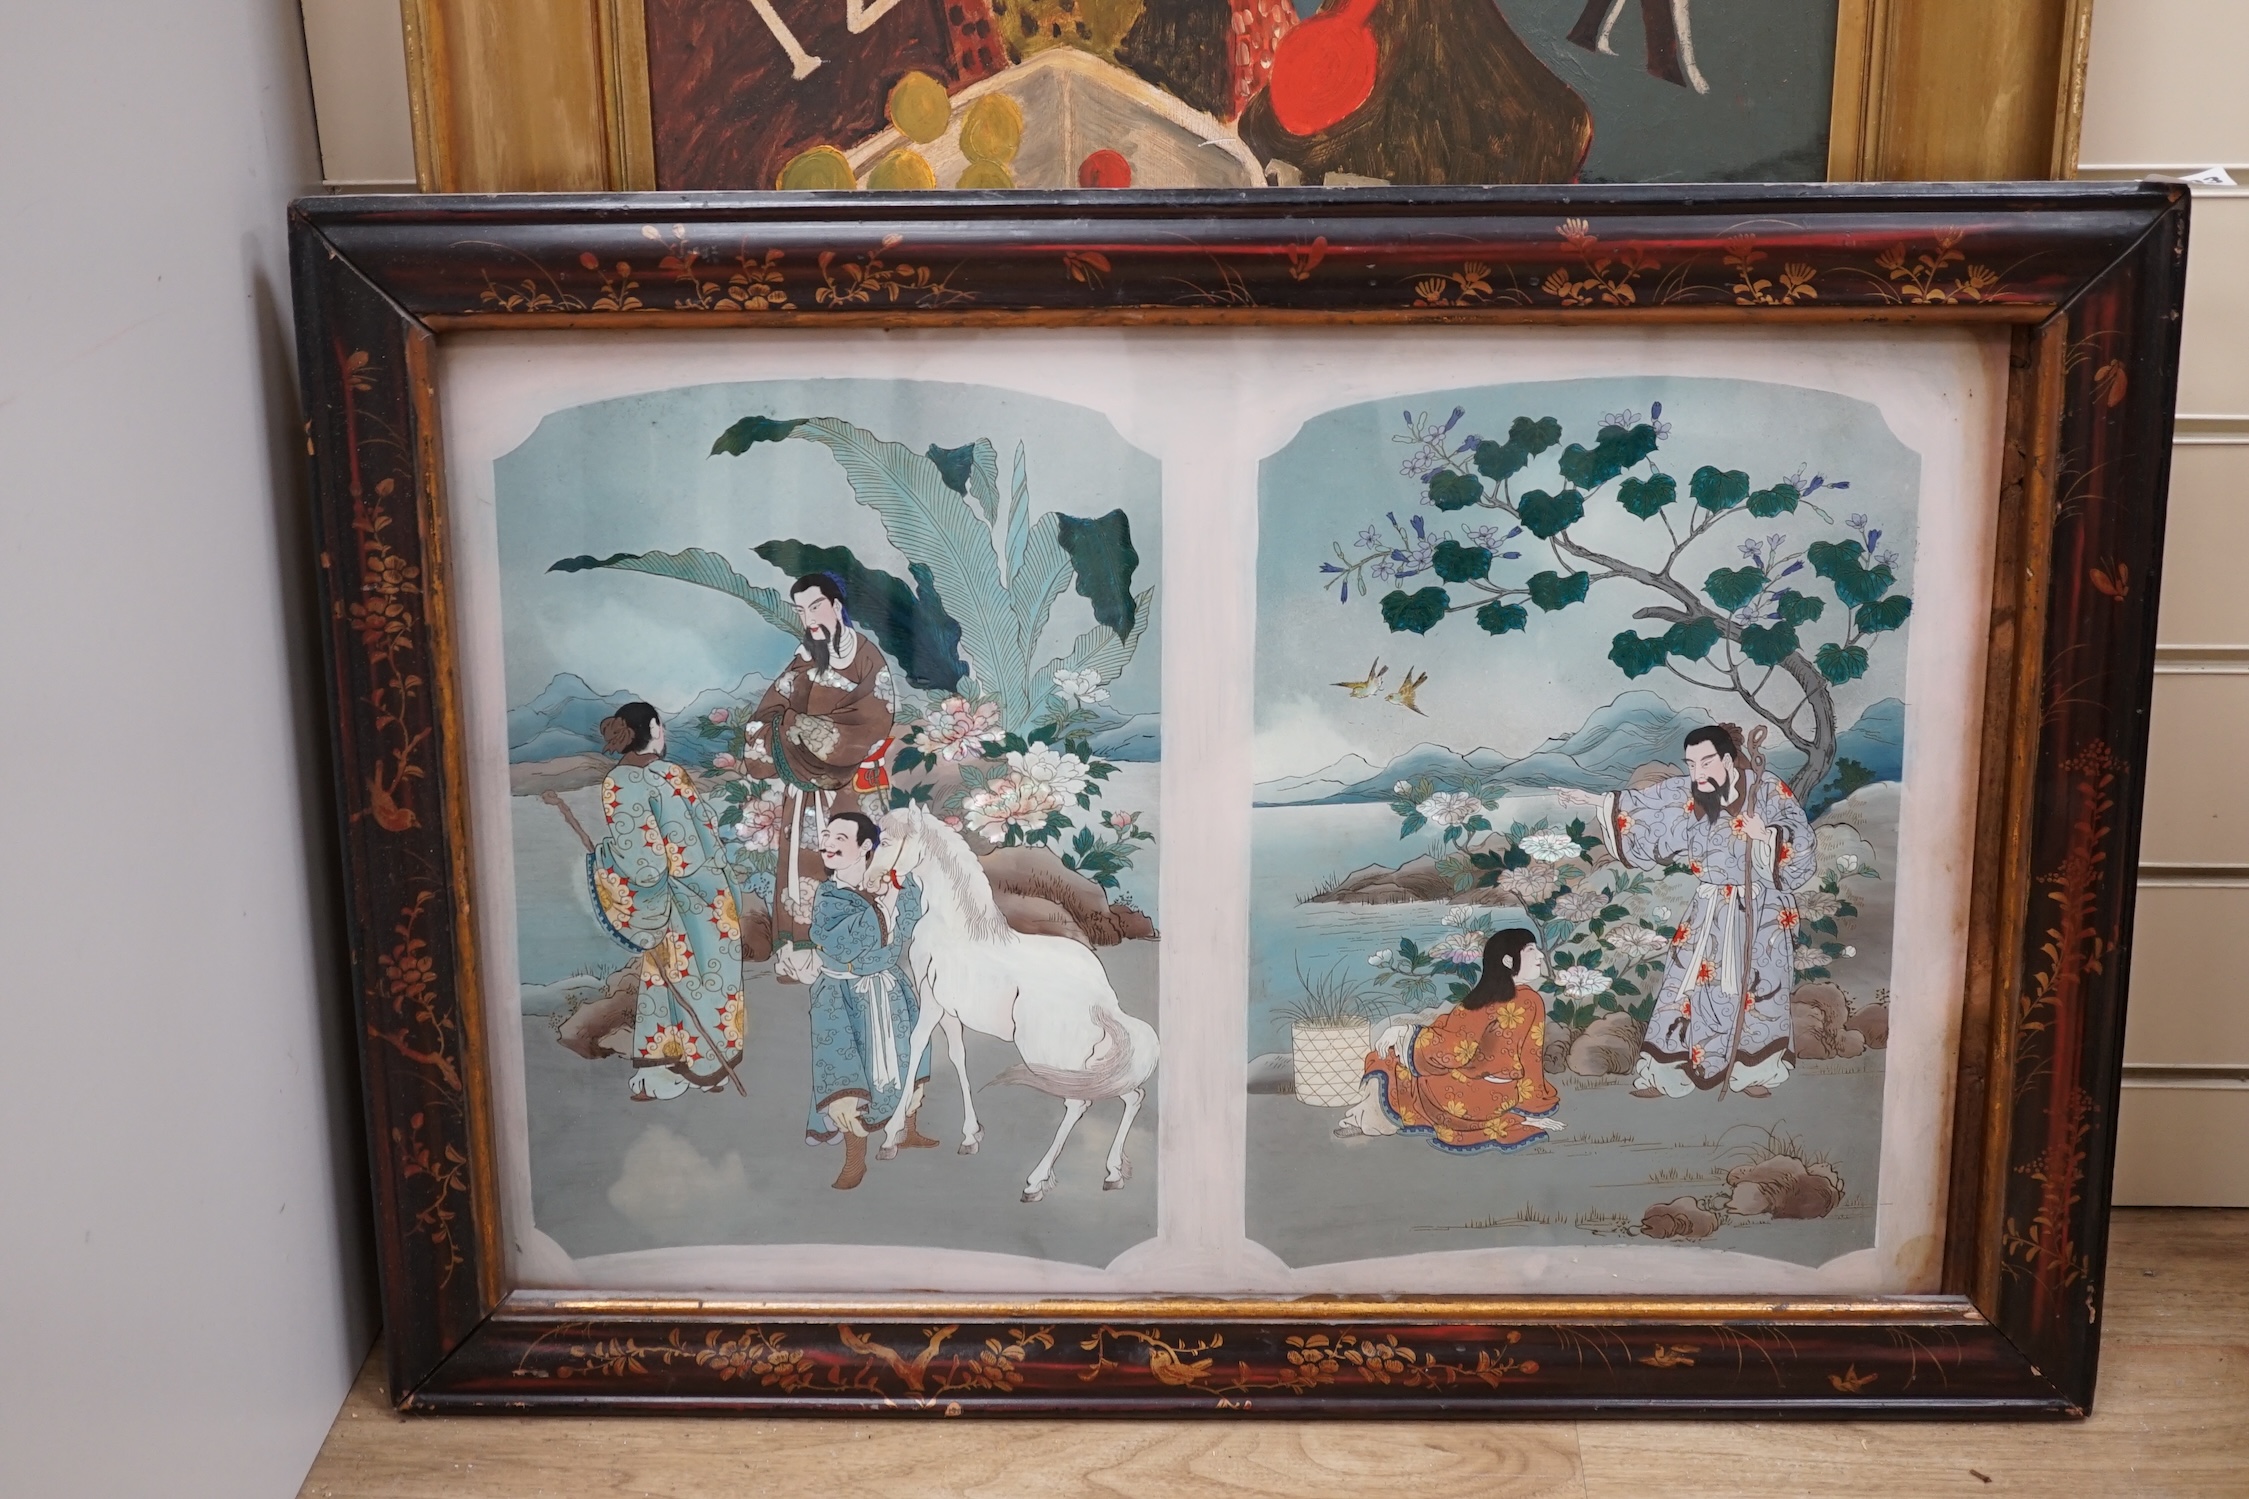 20th century Japanese School, reverse glass painted picture, Figures before landscapes, overall 39 x 59cm, housed in a painted lacquered frame. Condition - fair to good